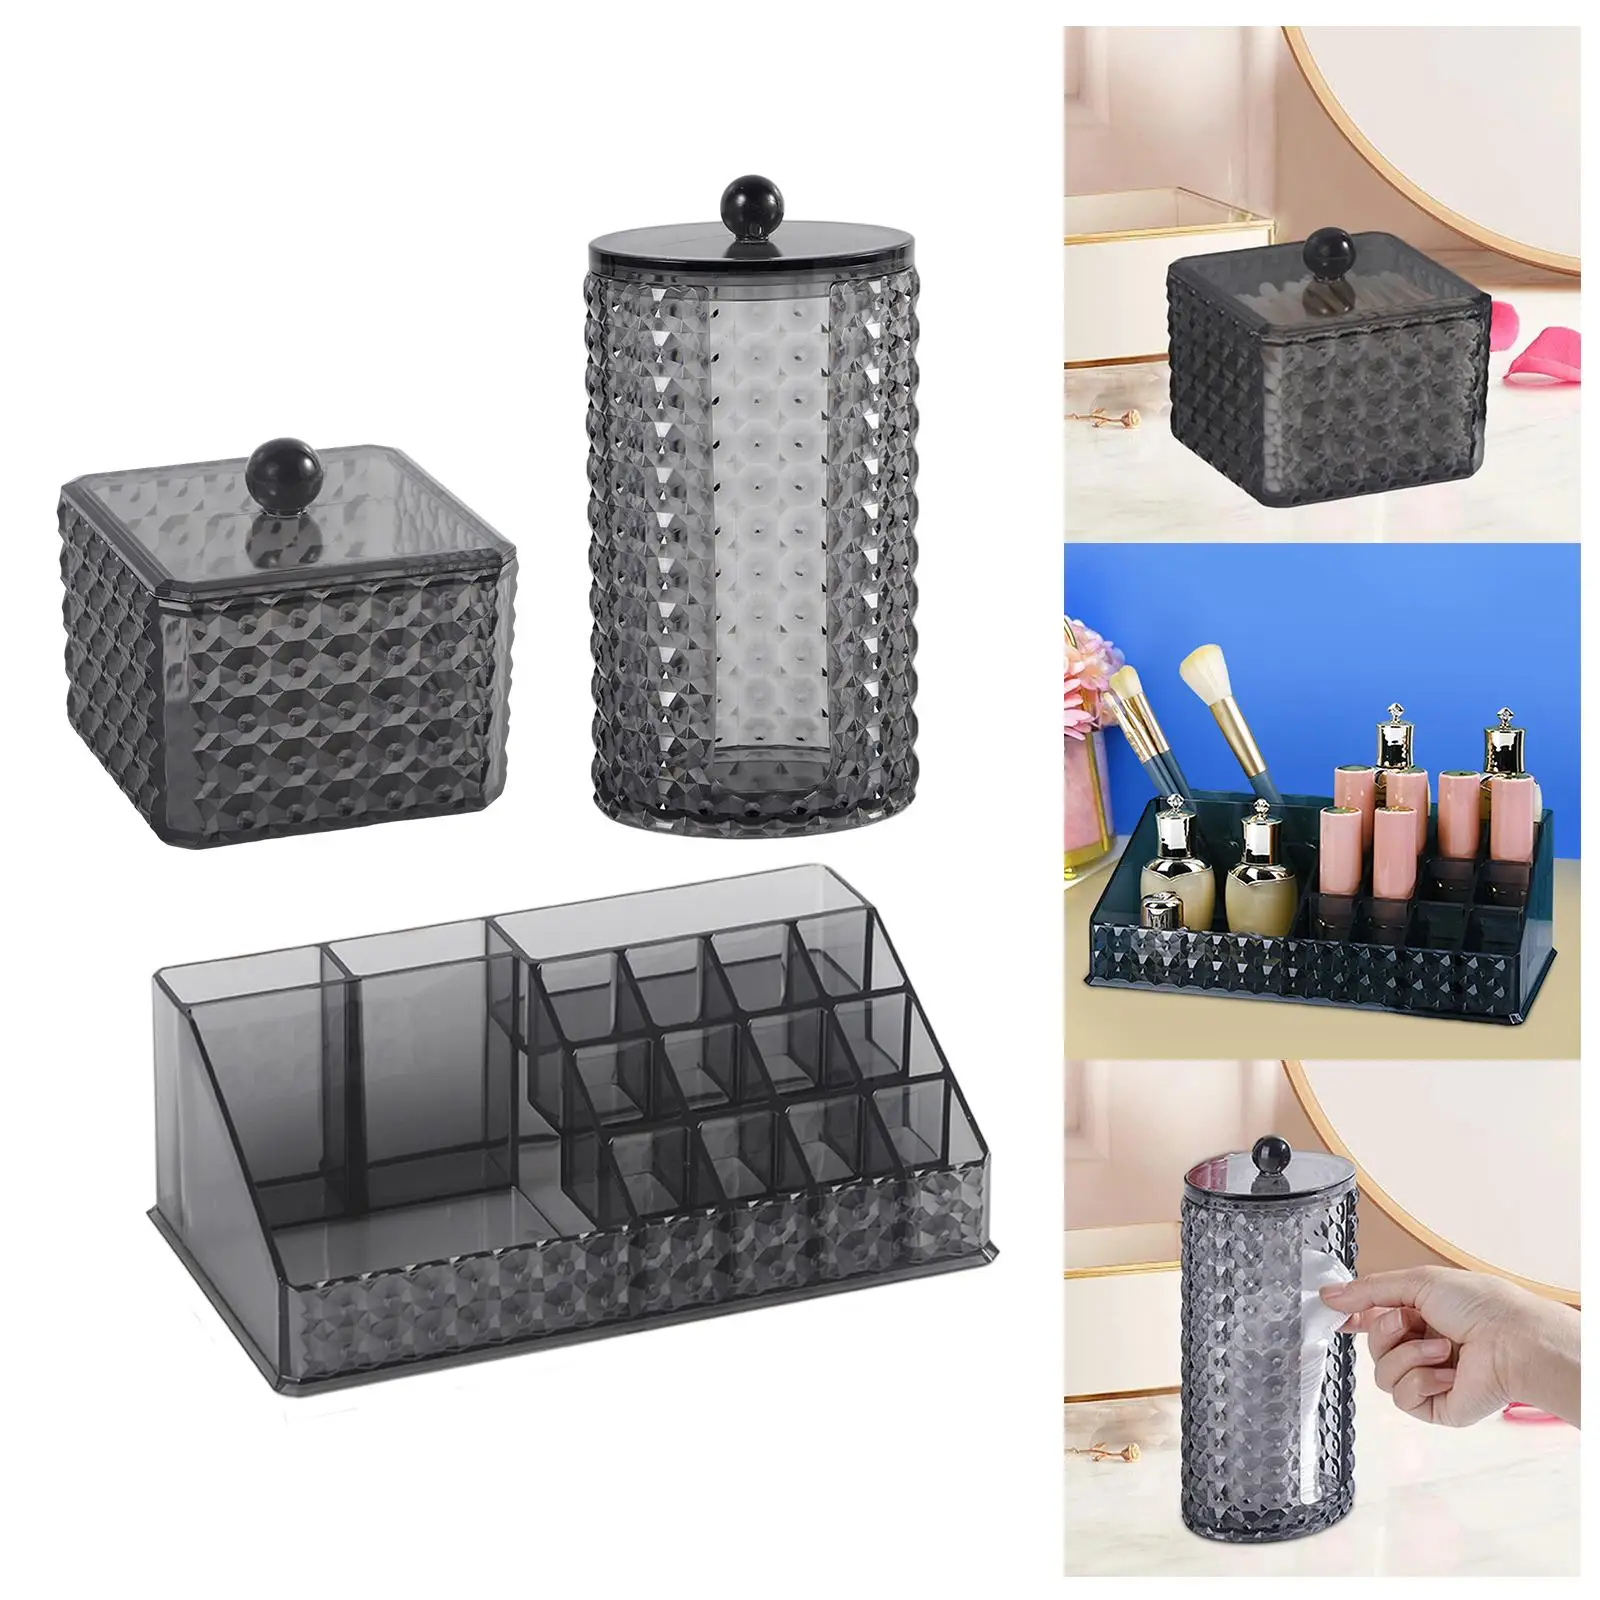 Cosmetic Pads Container Cotton Swabs Storage Organizer Makeup Sponges Cotton Ball Holder for Bathroom Jewelry Countertop Vanity